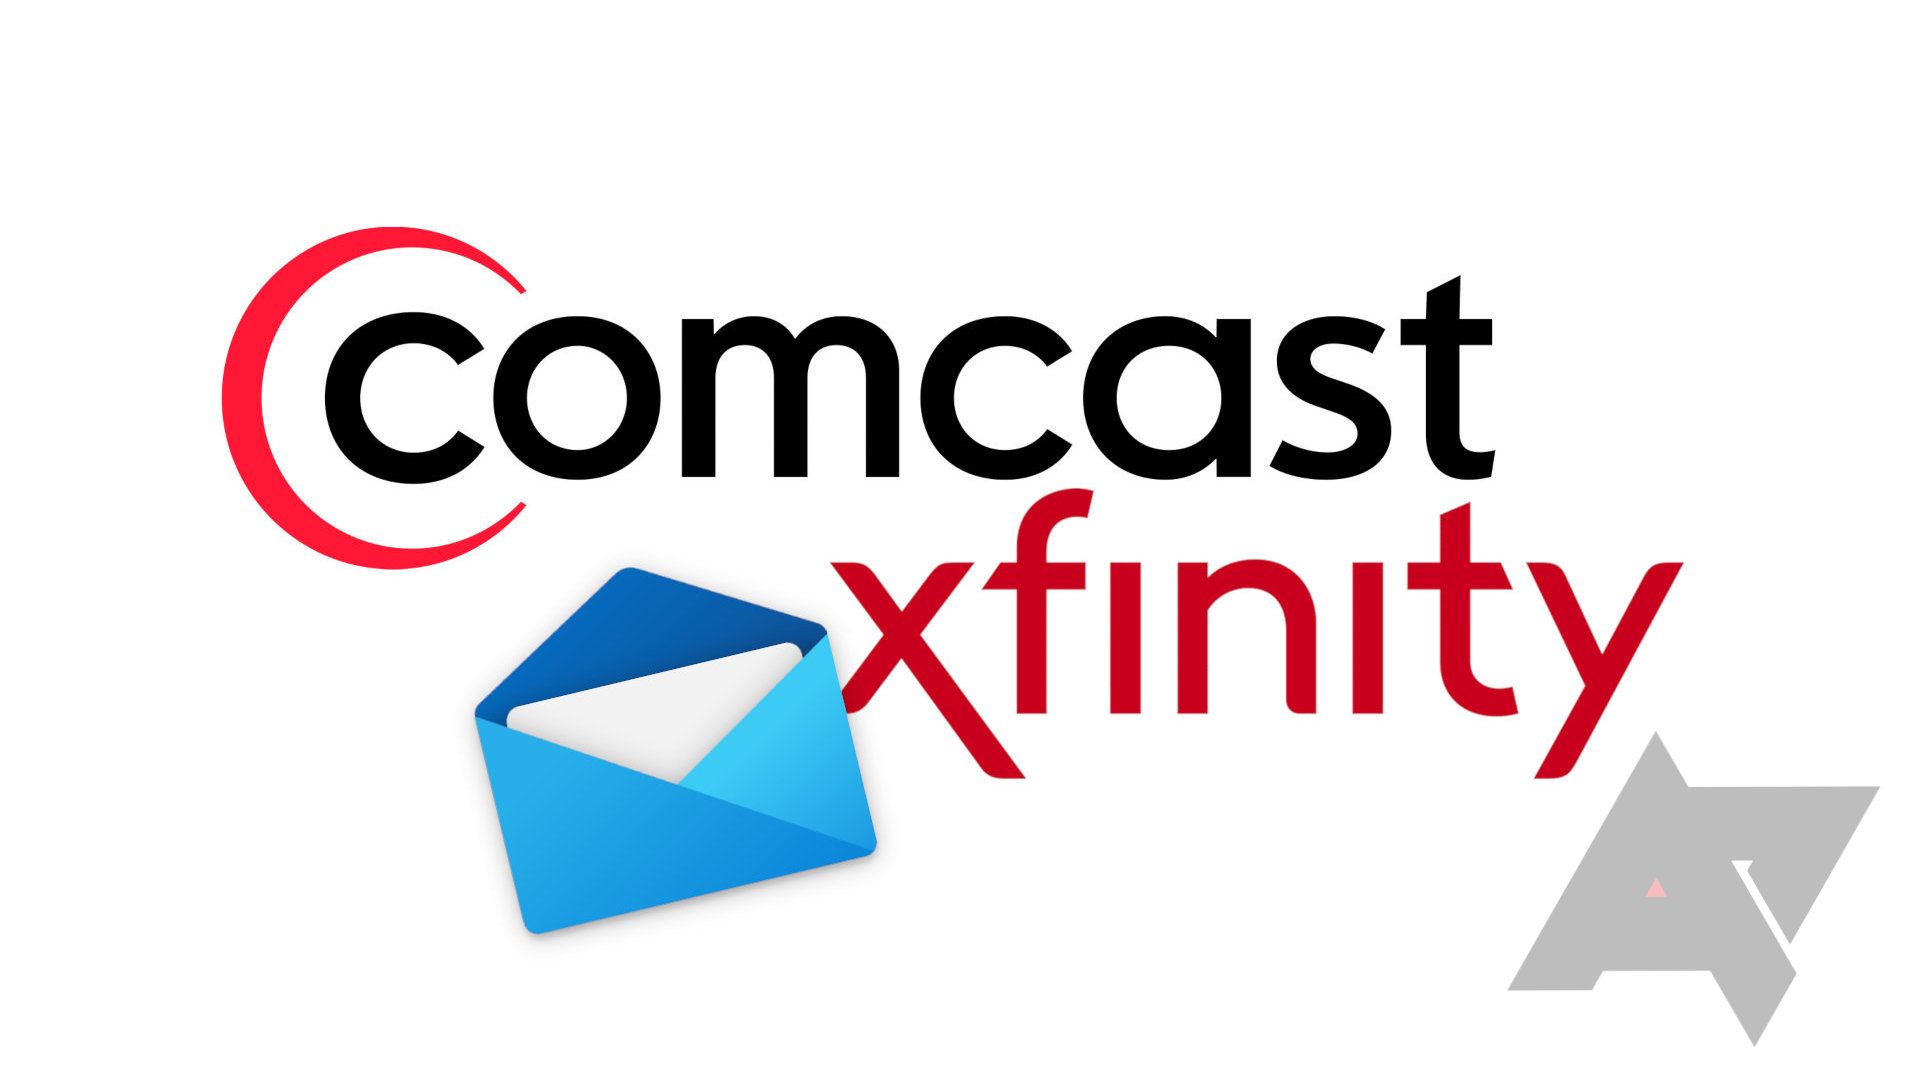 How to backup your Comcast Xfinity emails